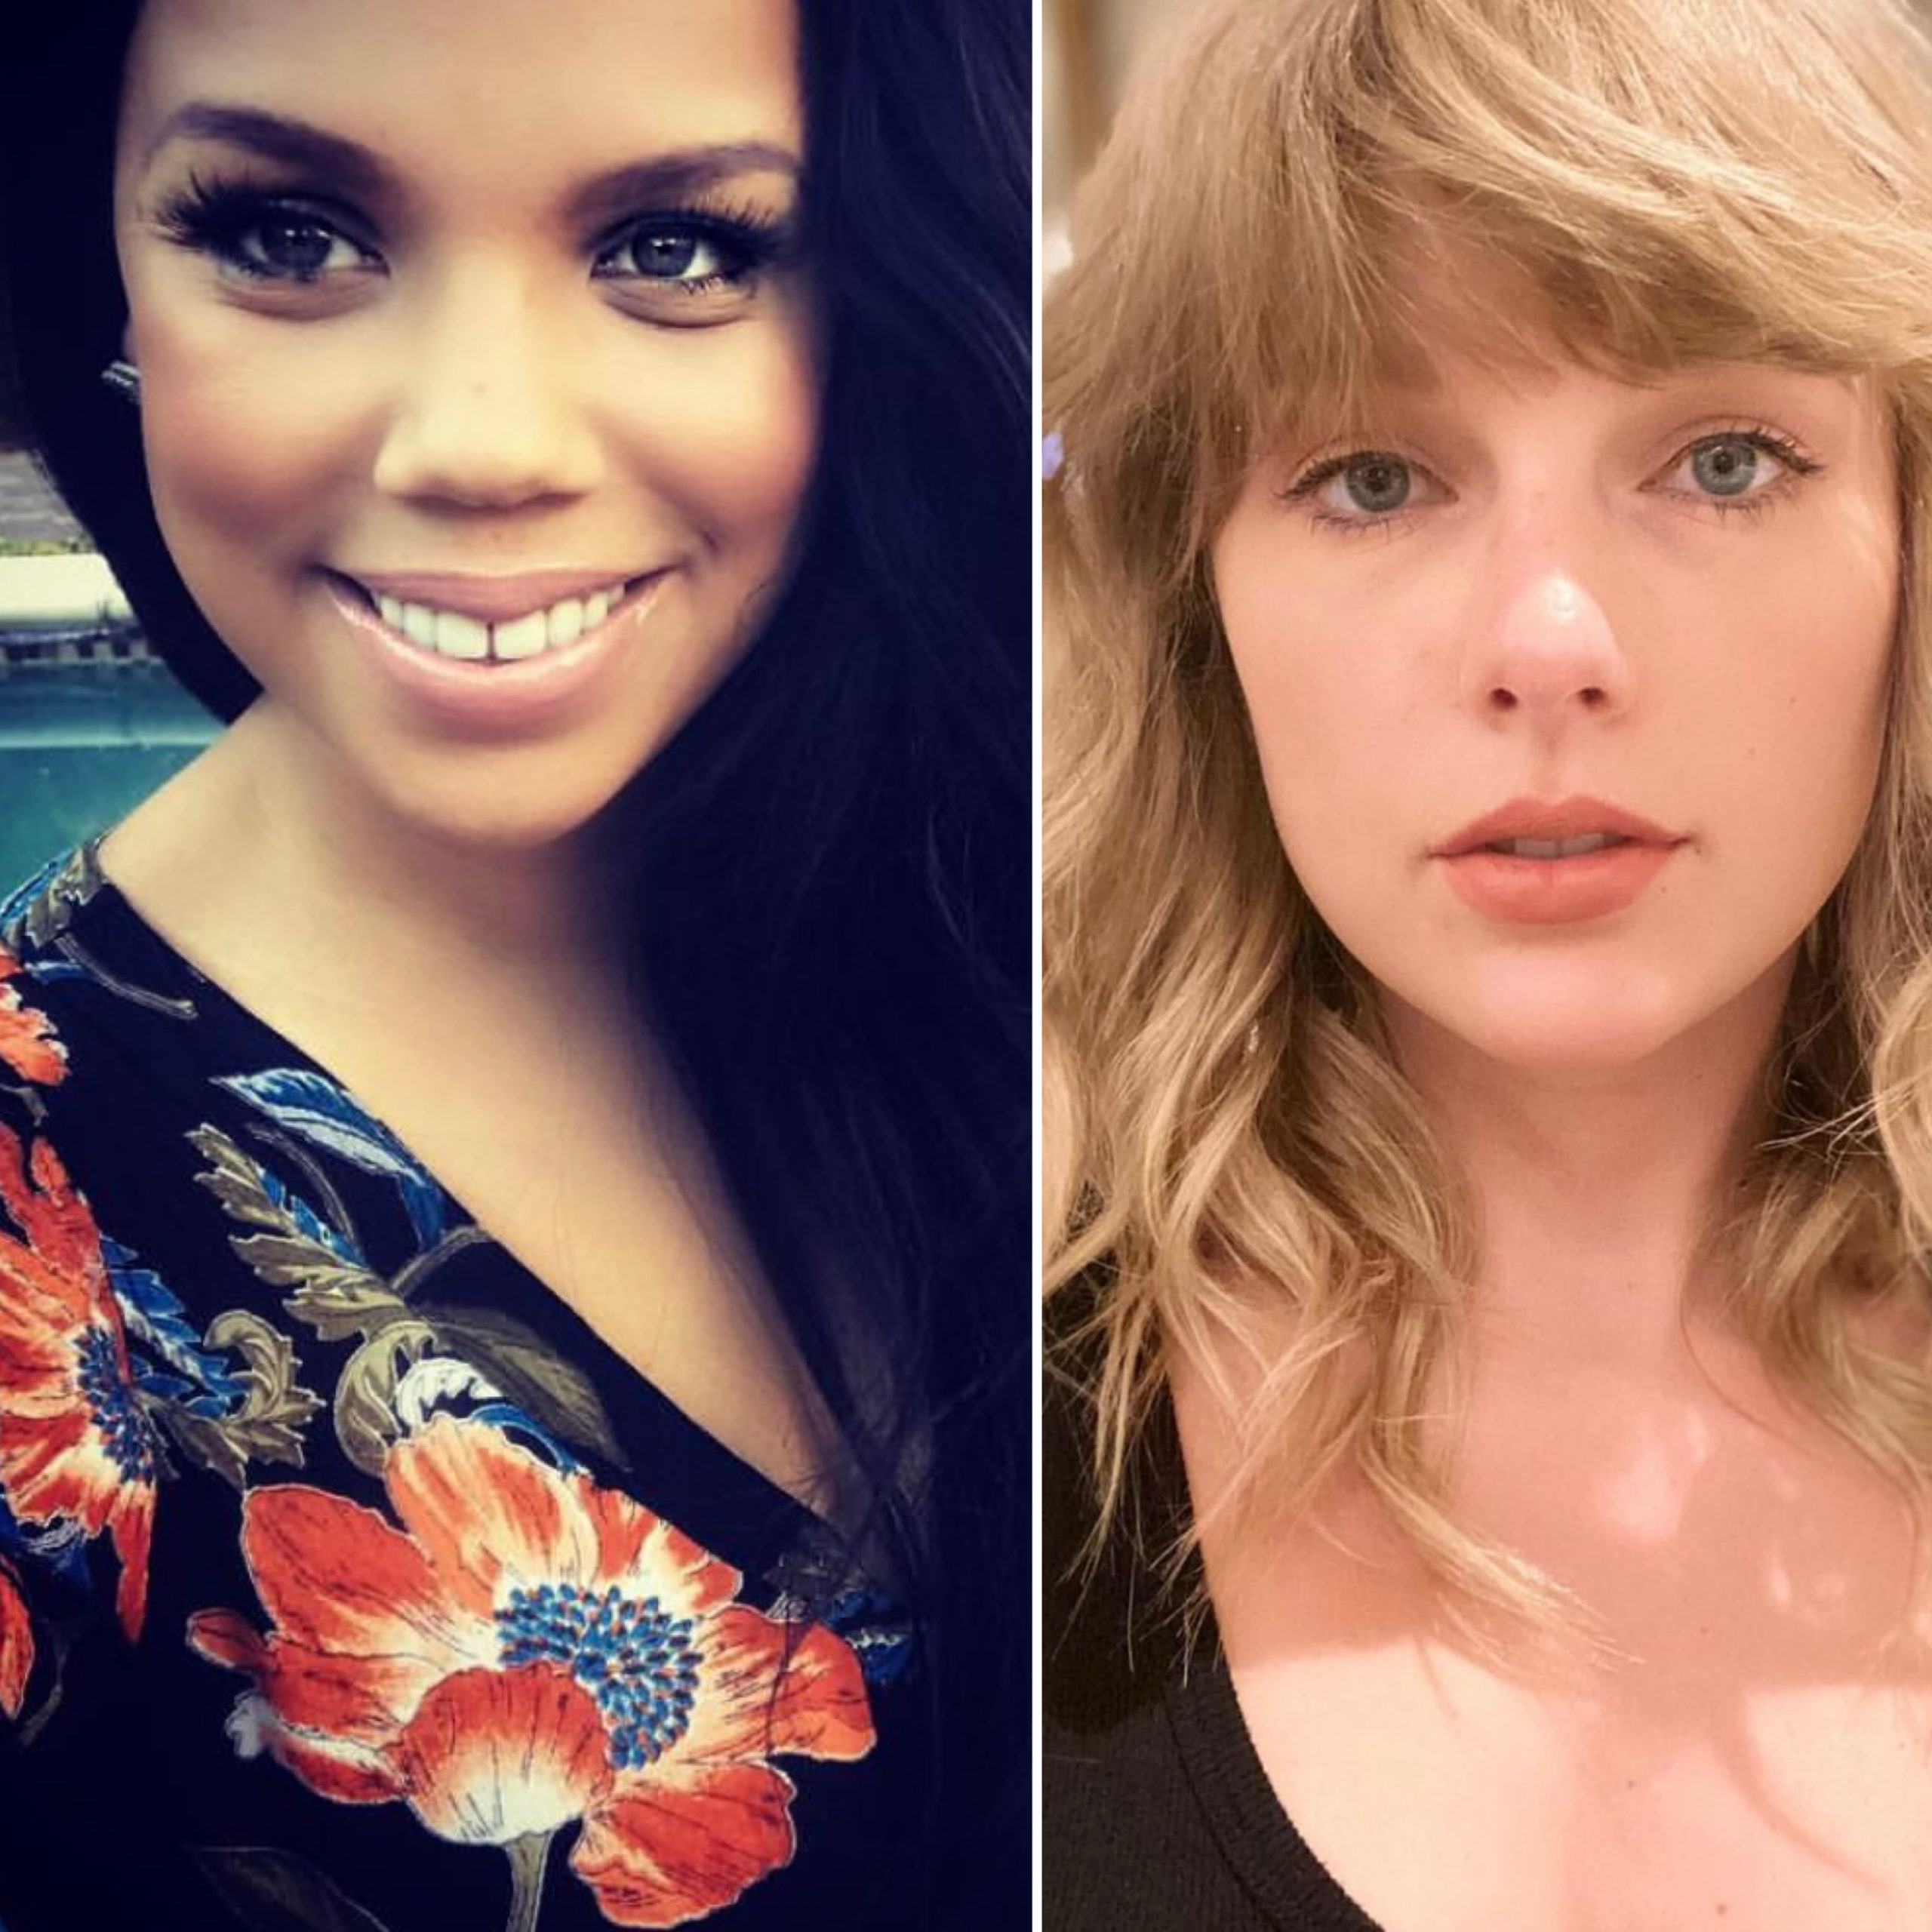 Taylor Swift Responds to 3LW's Haters Lawsuit